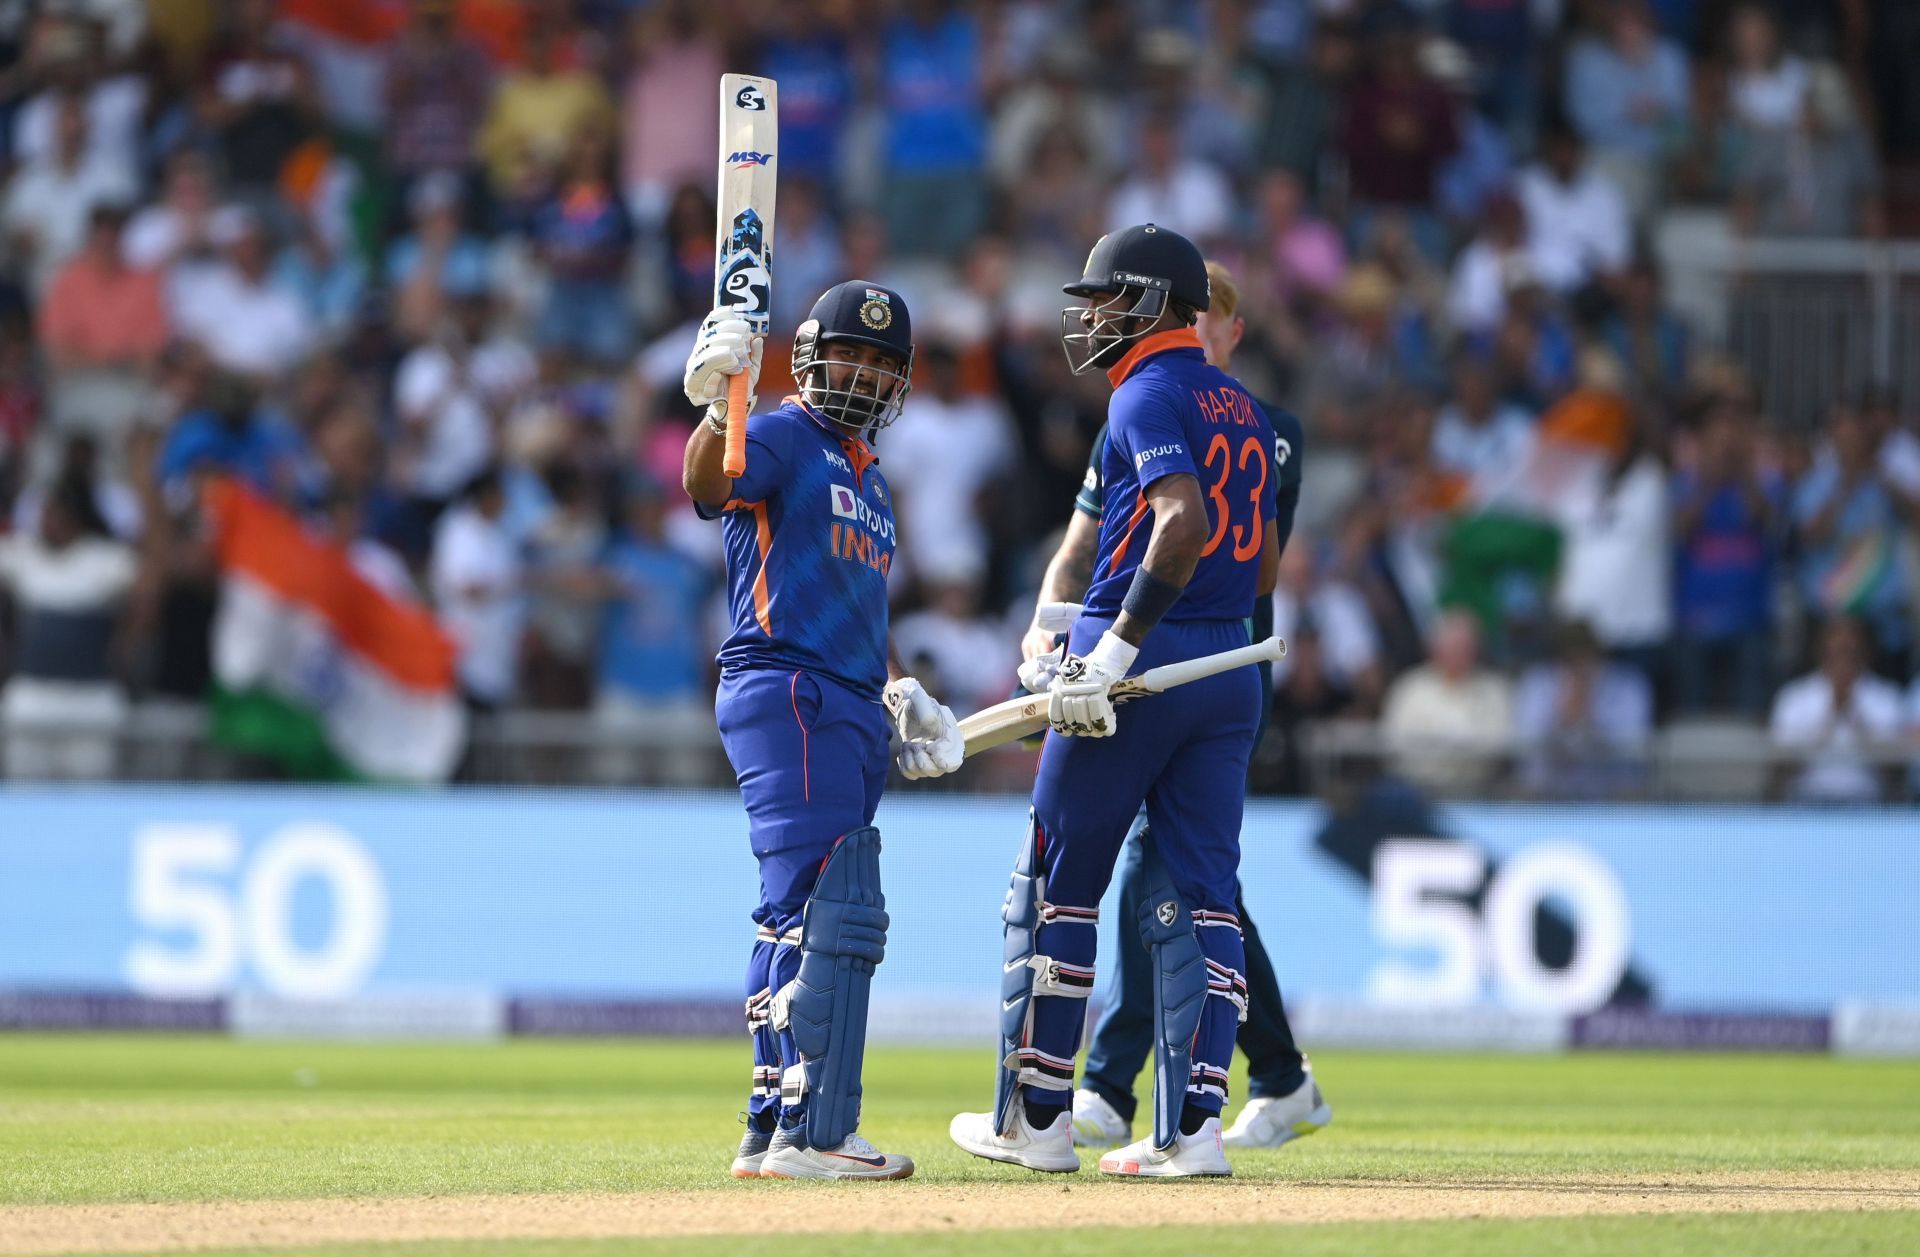 Rishabh Pant is yet to set the stage on fire in T20Is